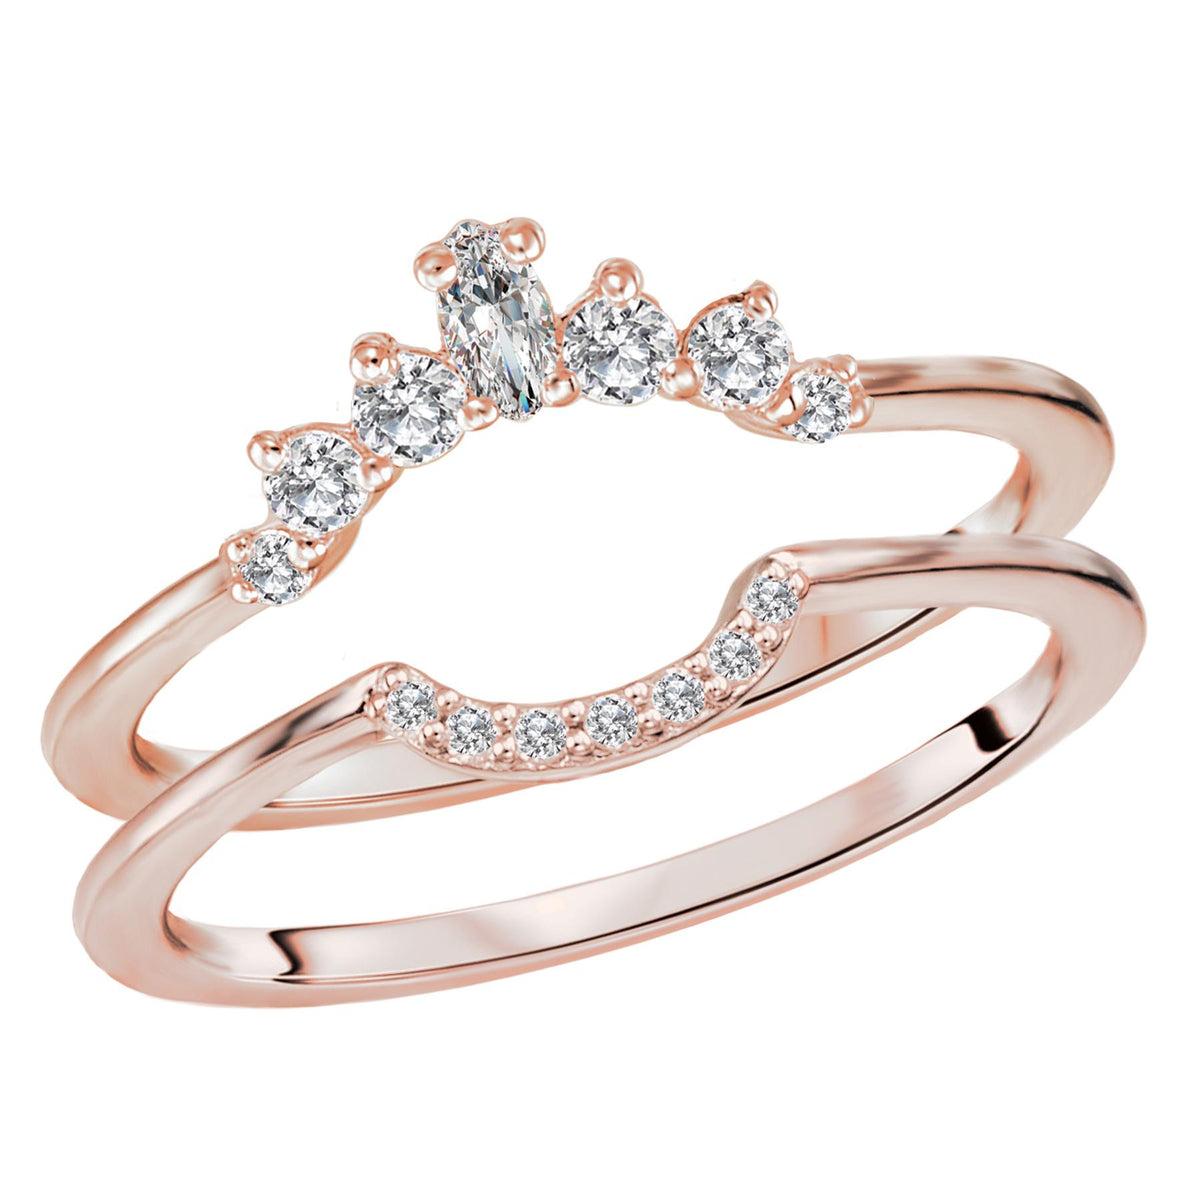 14KT Gold 1/4 CTW Diamond Curved Nesting Band Rose / 4,Rose / 4.5,Rose / 5,Rose / 5.5,Rose / 6,Rose / 6.5,Rose / 7,Rose / 7.5,Rose / 8,Rose / 8.5,Rose / 9